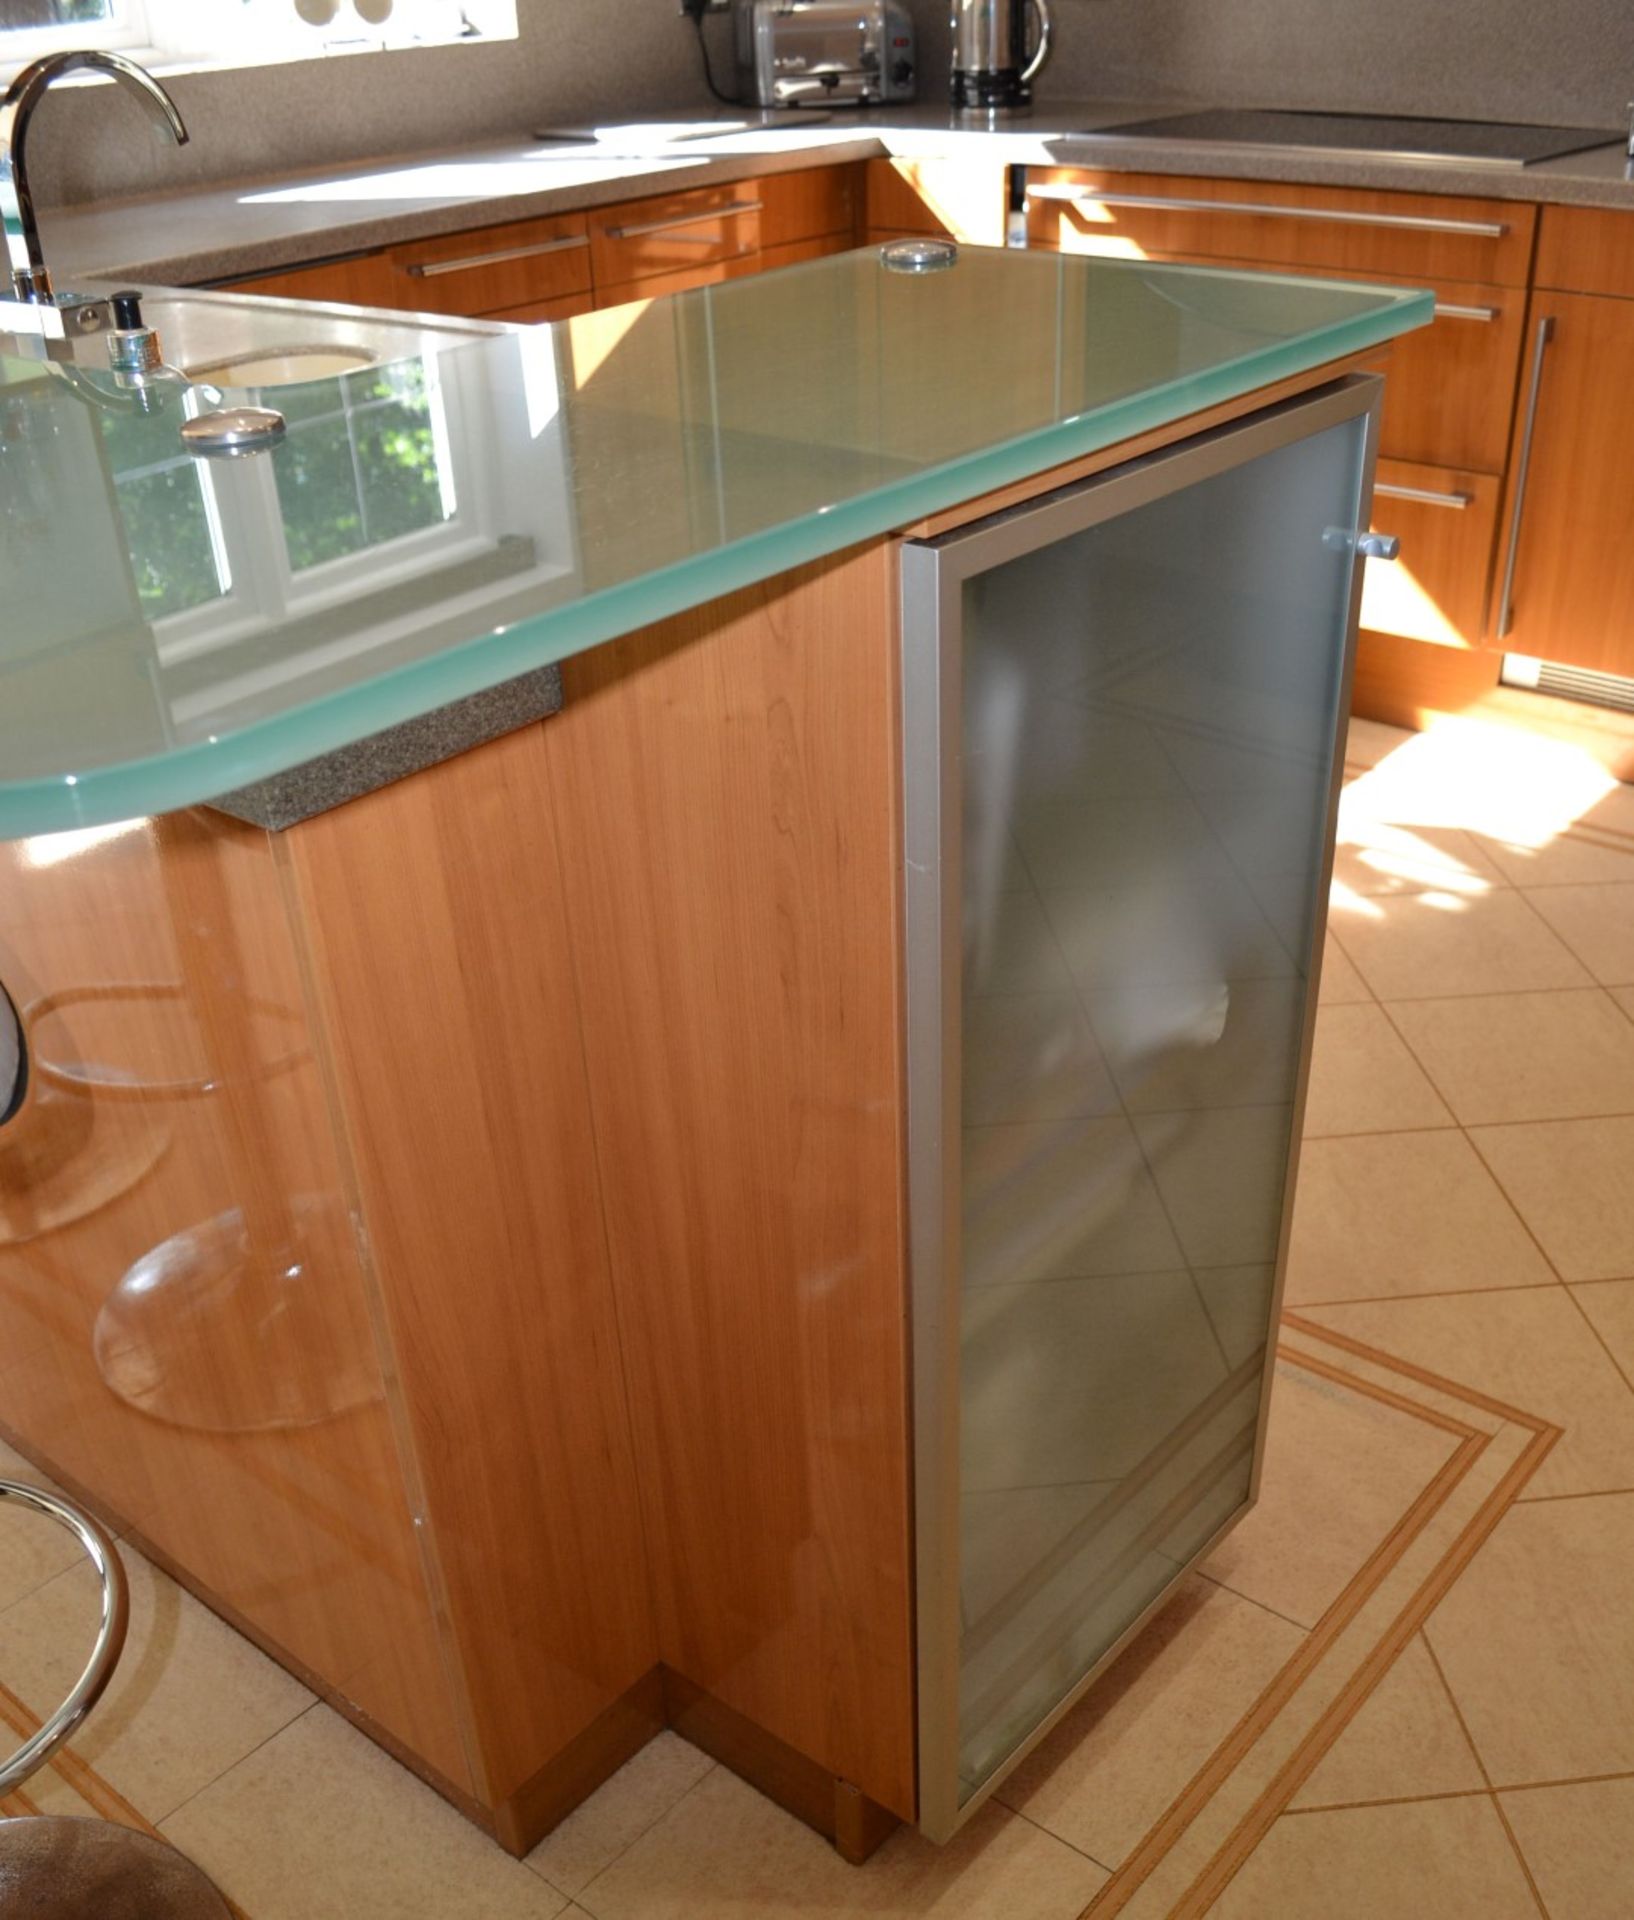 1 x Bespoke Siematic Gloss Fitted Kitchen With Corian Worktops and Frosted Glass Breakfast Bar - - Image 66 of 75